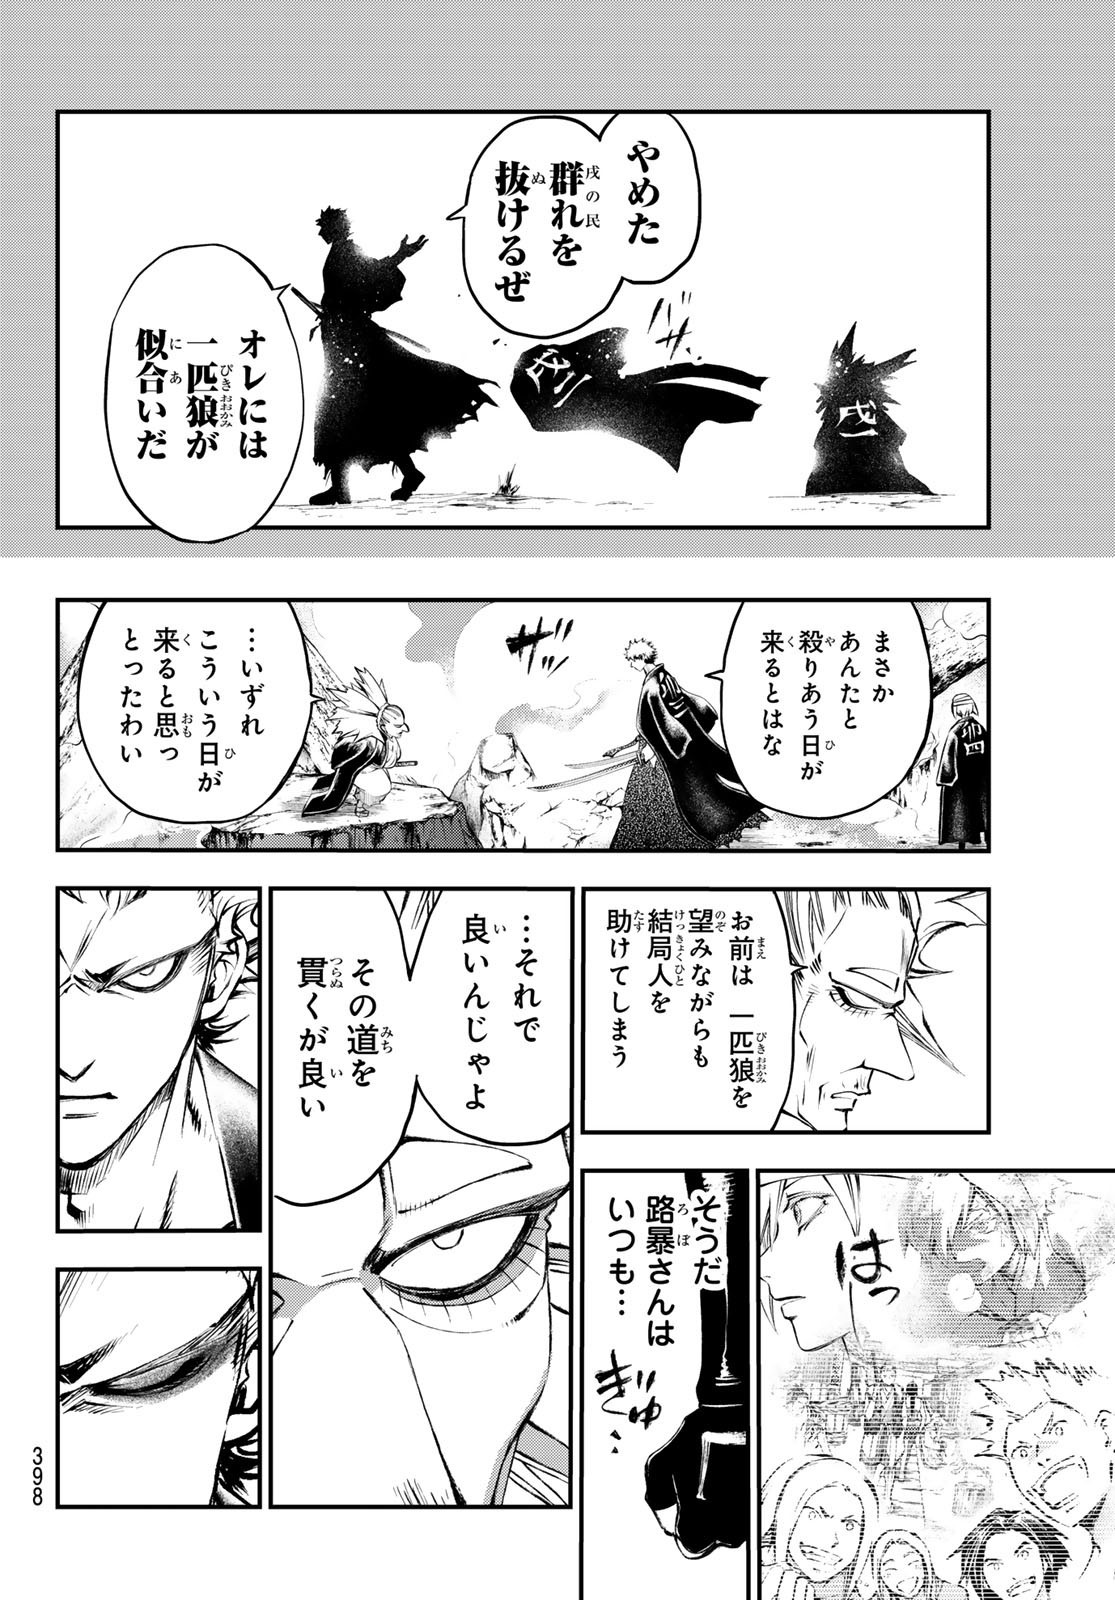 Weekly Shōnen Magazine - 週刊少年マガジン - Chapter 2024-32 - Page 396